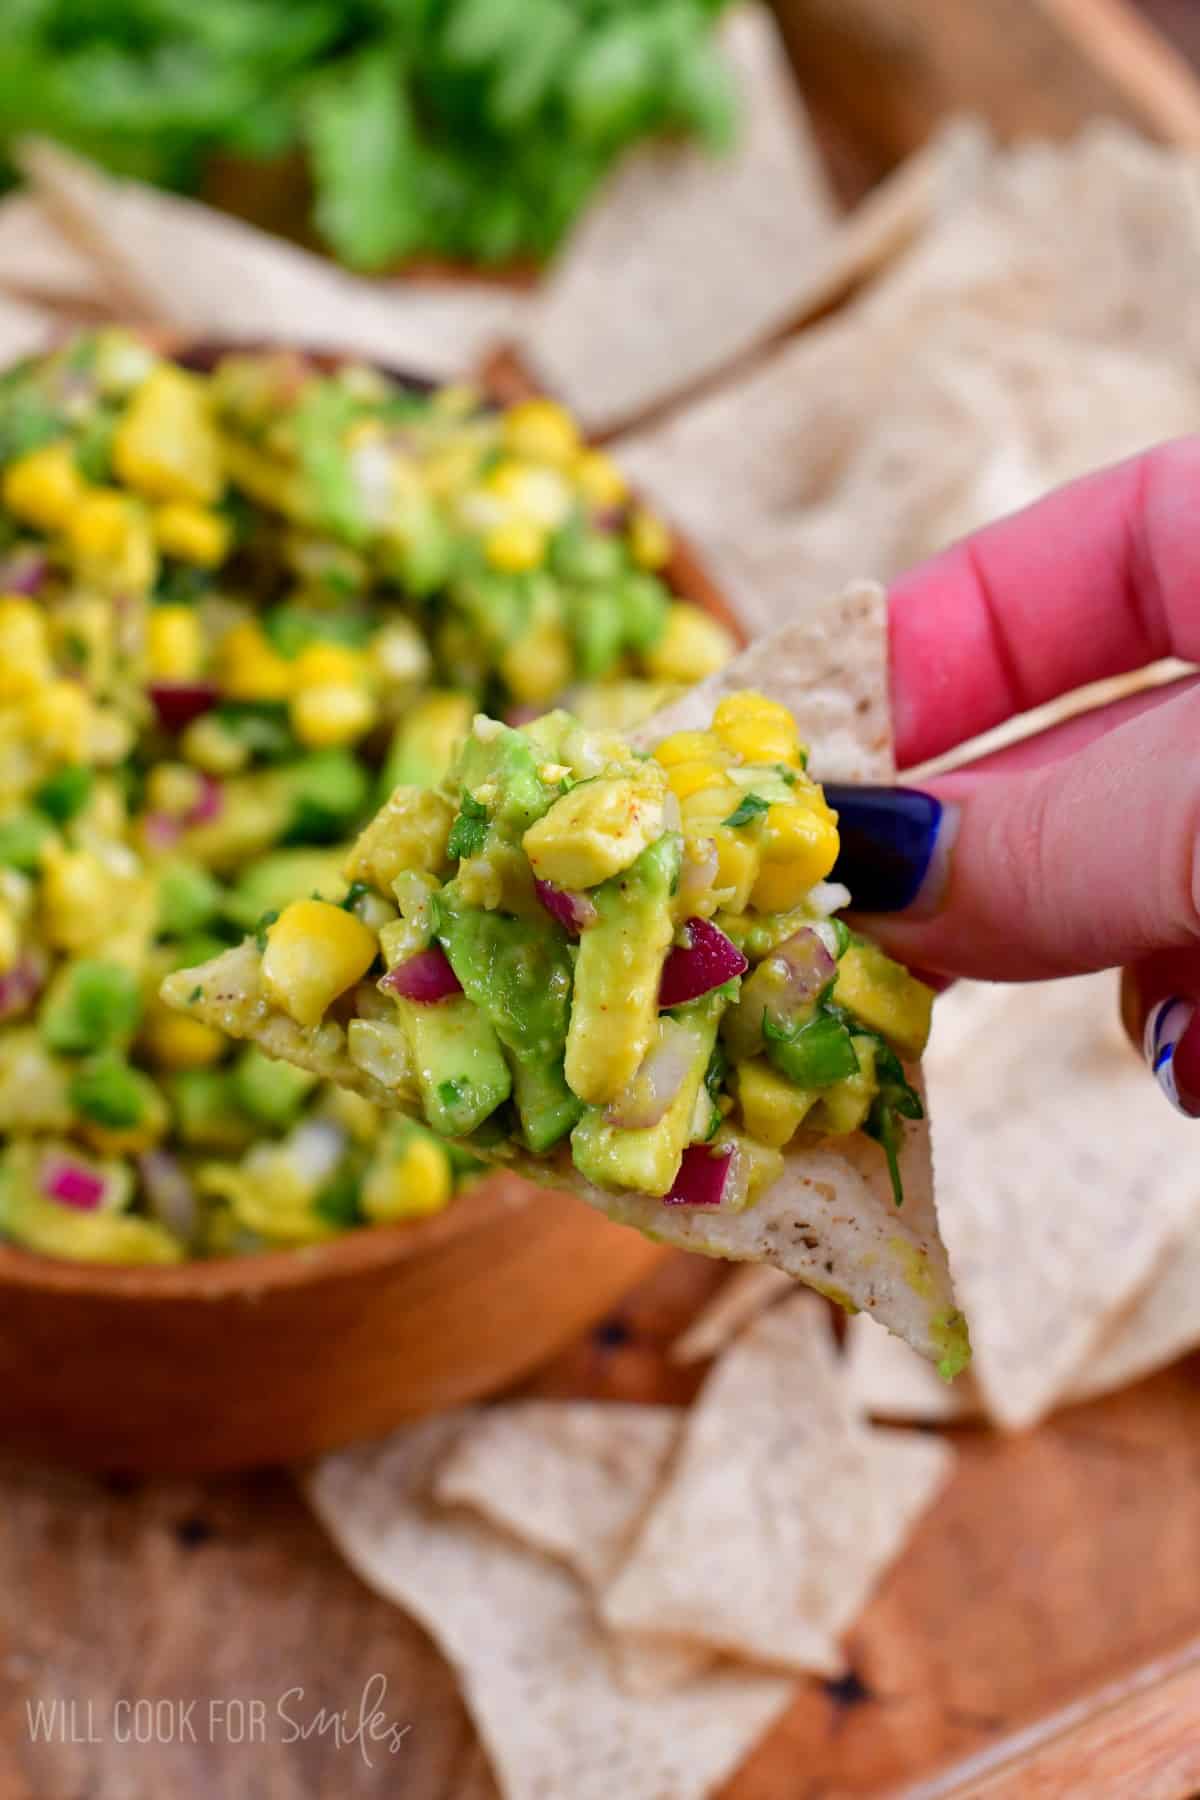 Holding a chip with avocado salsa on top and the bowl of avocado salsa in the backgound.